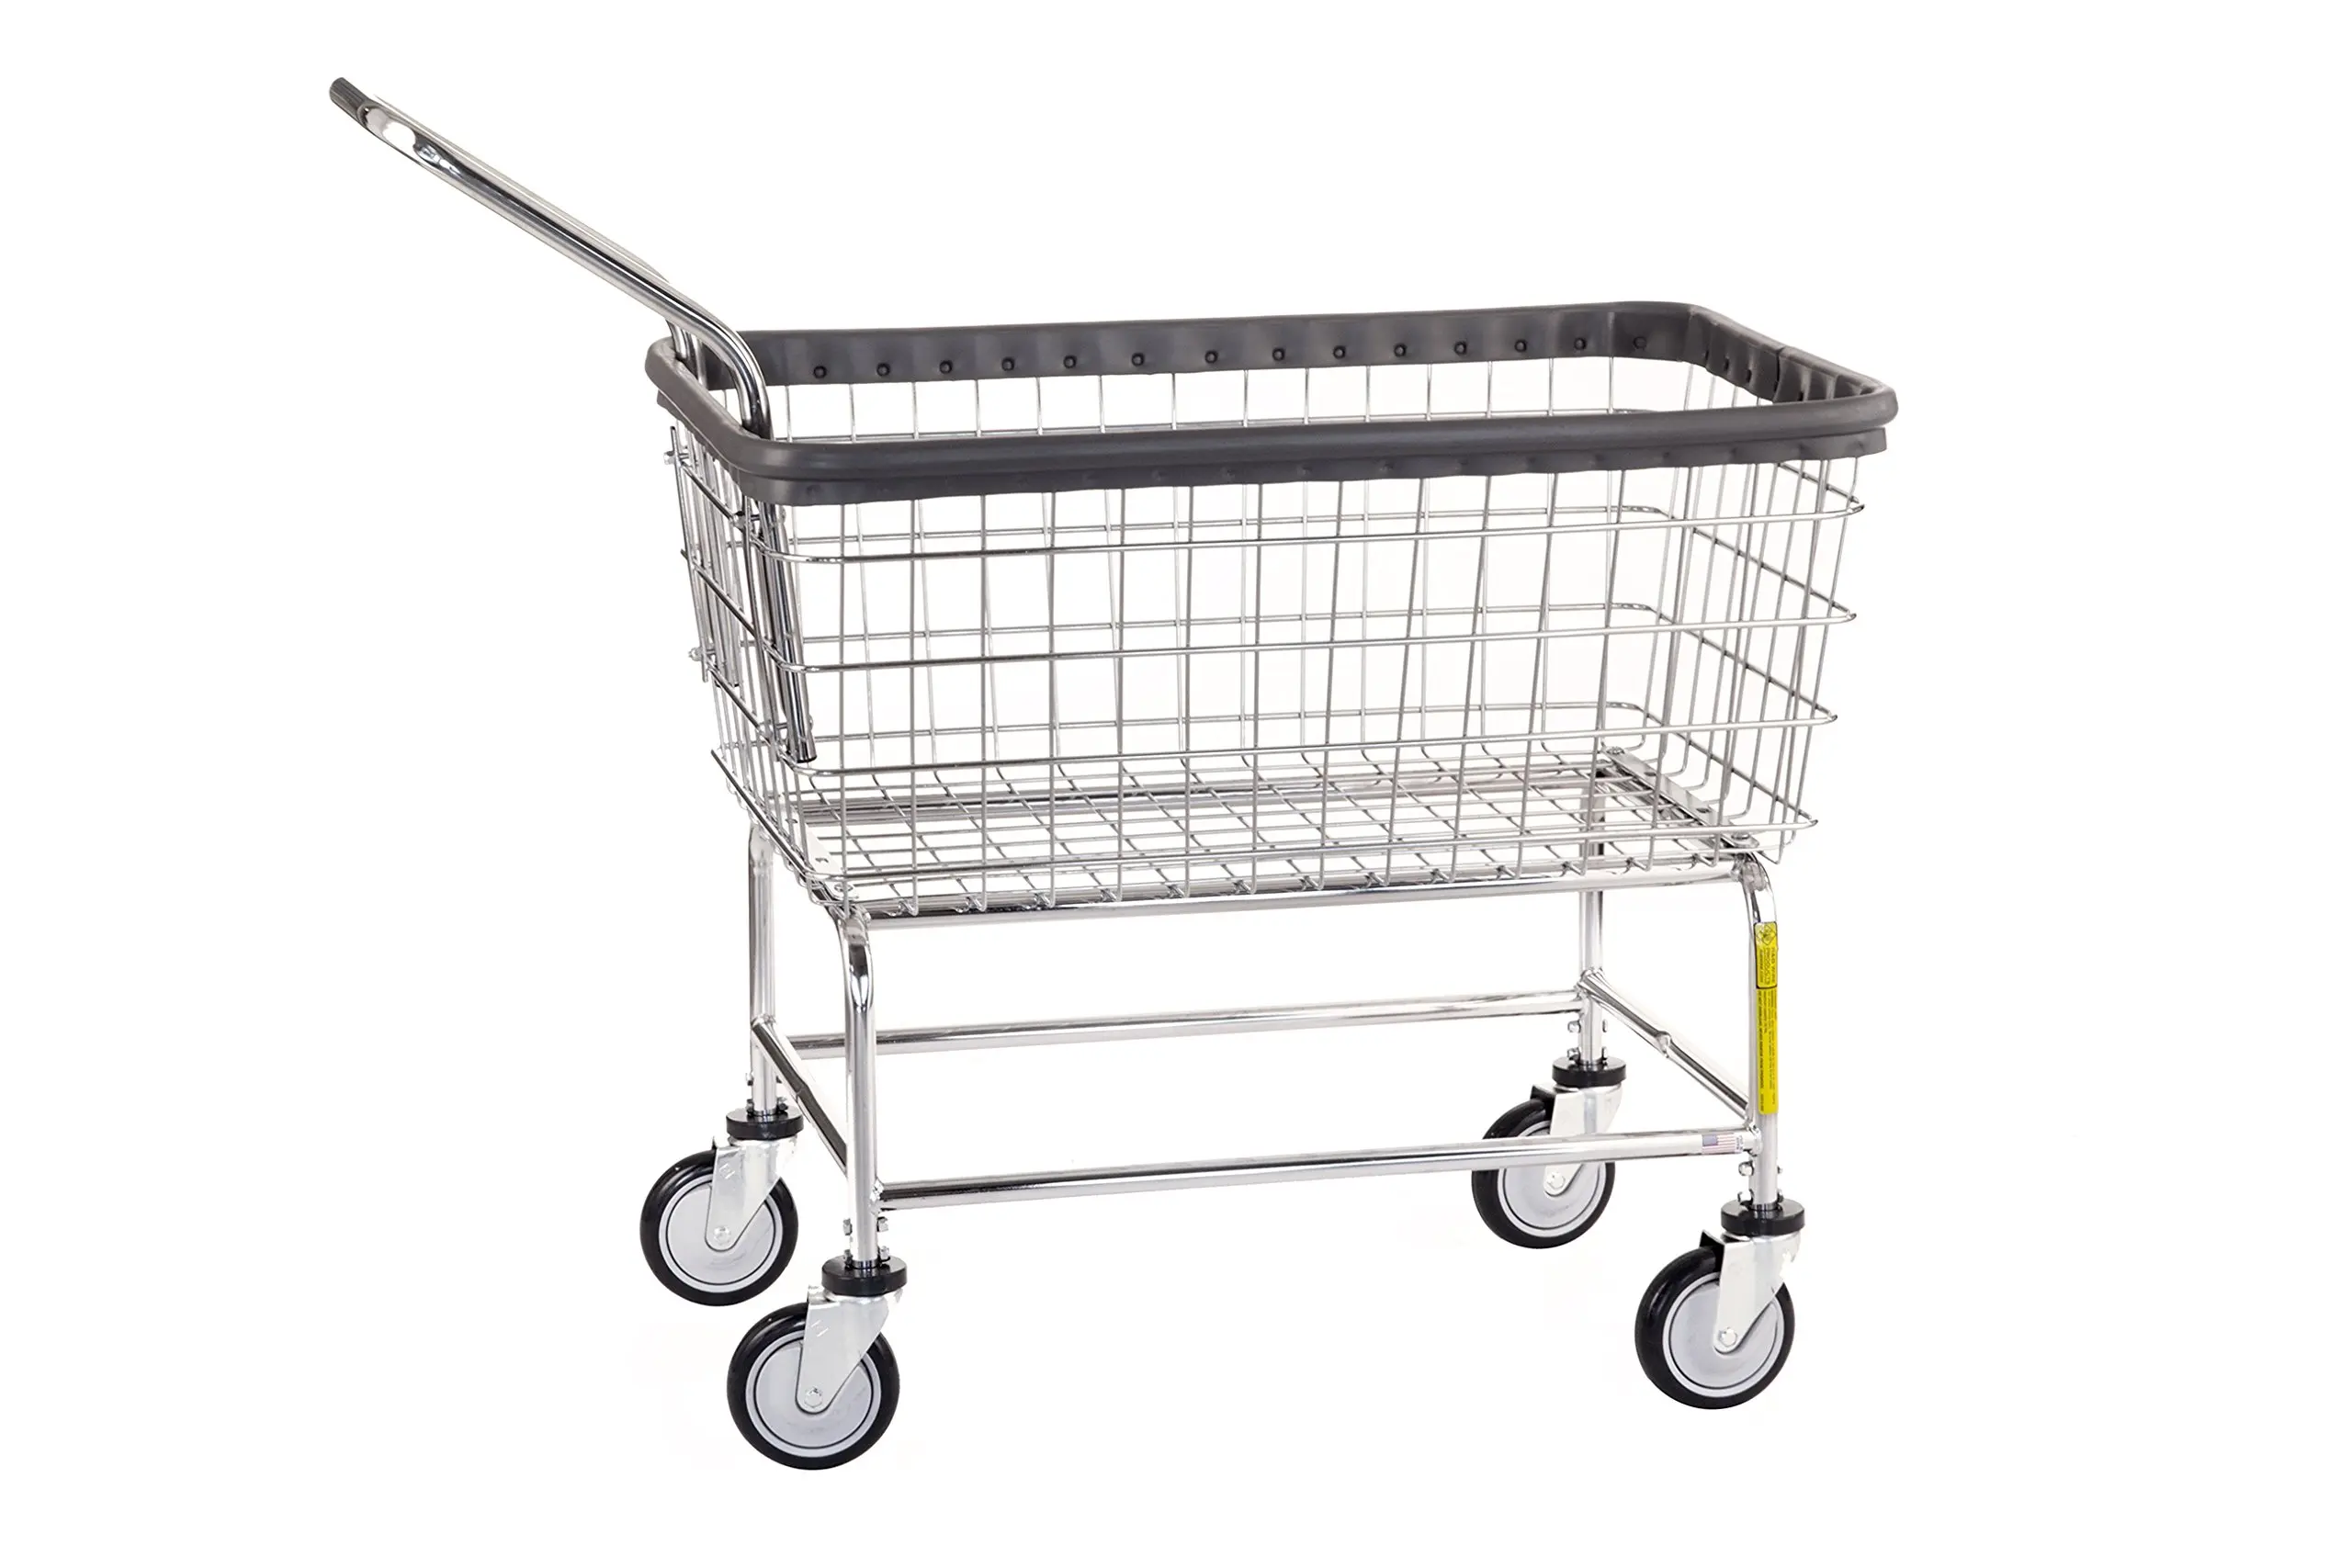 Cheap Wire Laundry Cart On Wheels, find Wire Laundry Cart On Wheels ...